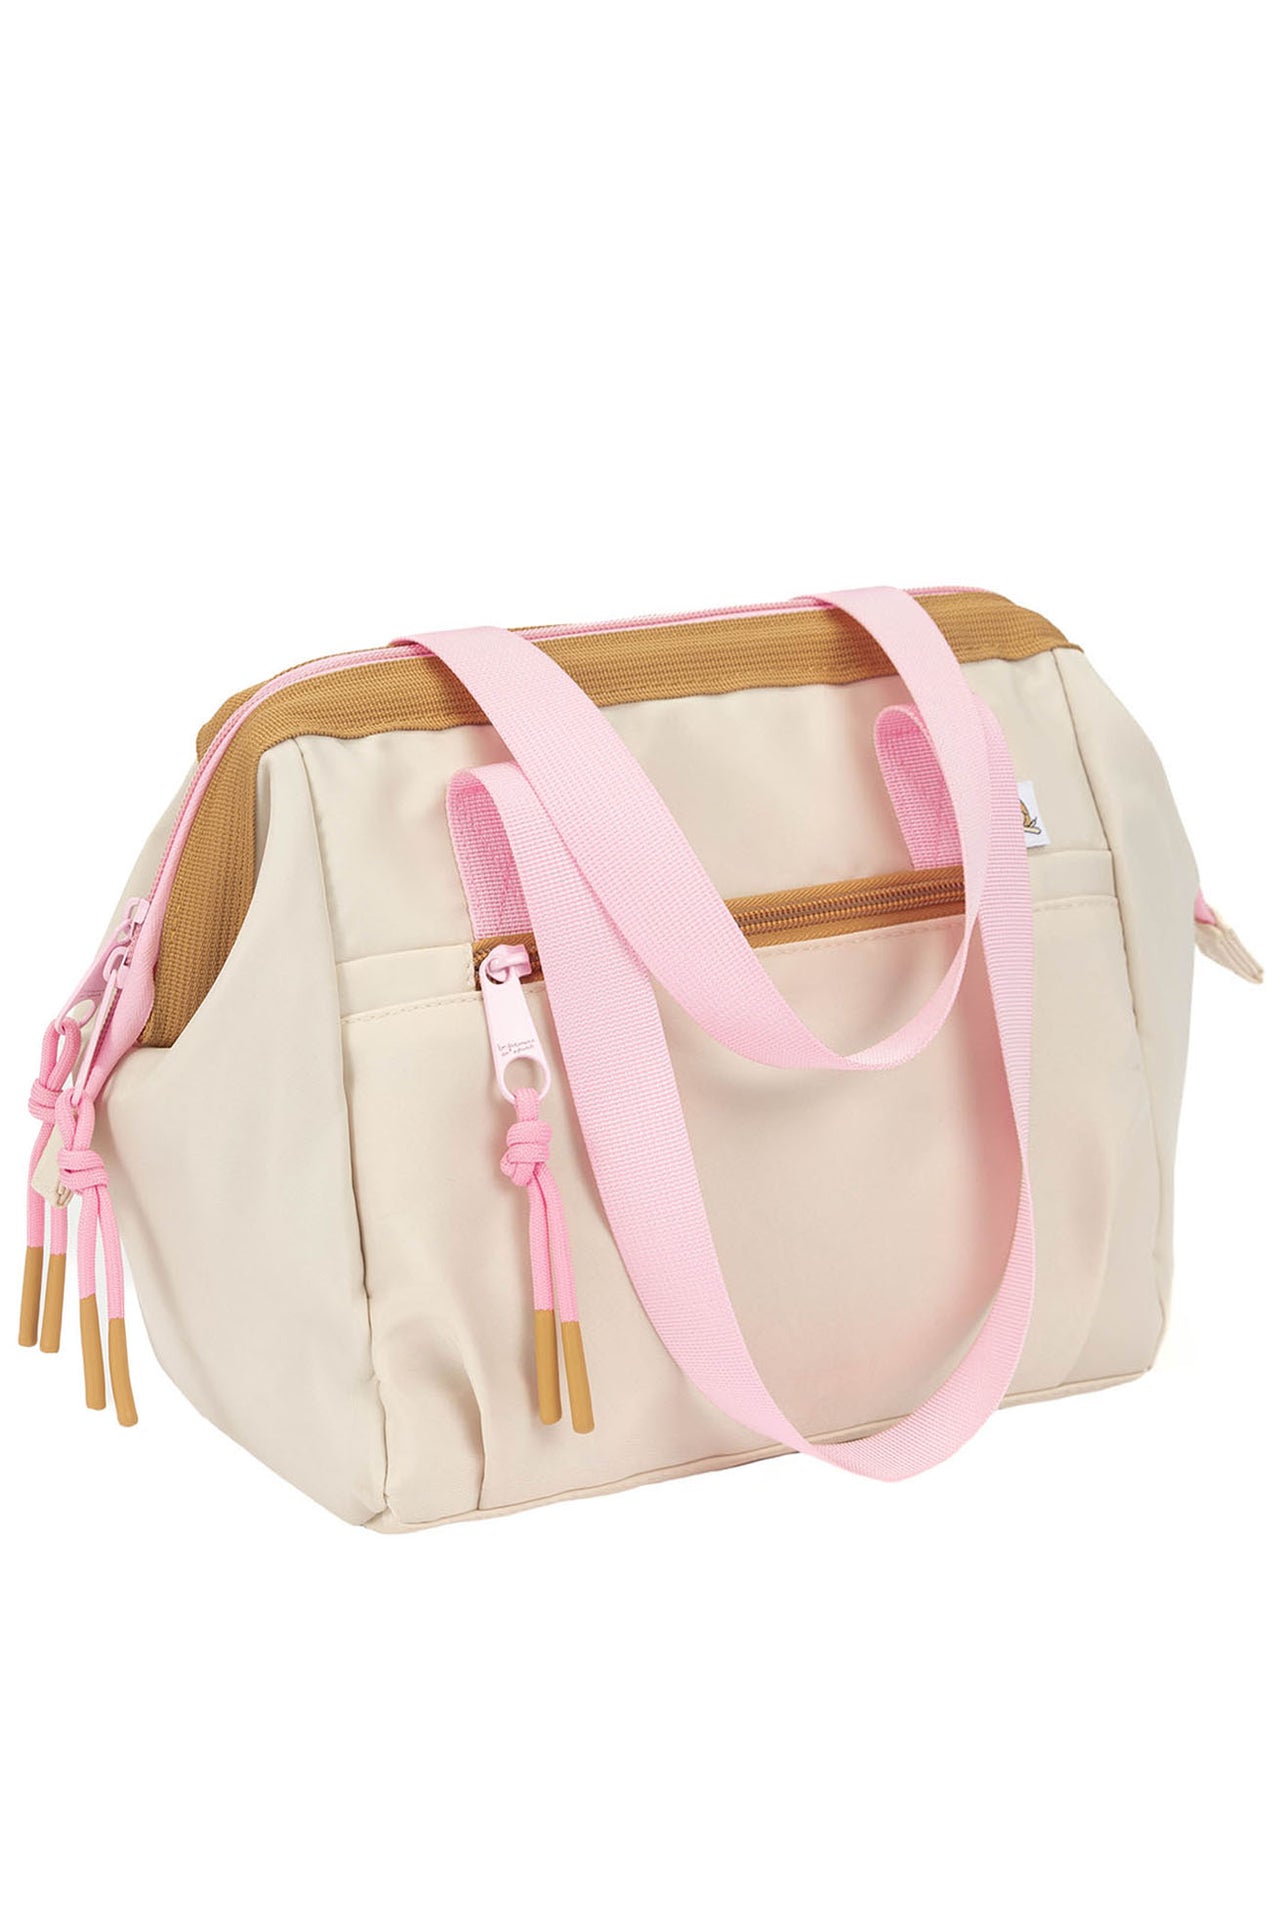 LUNCH BAG WITH HANDLES BEIGE - SOFT COLORS